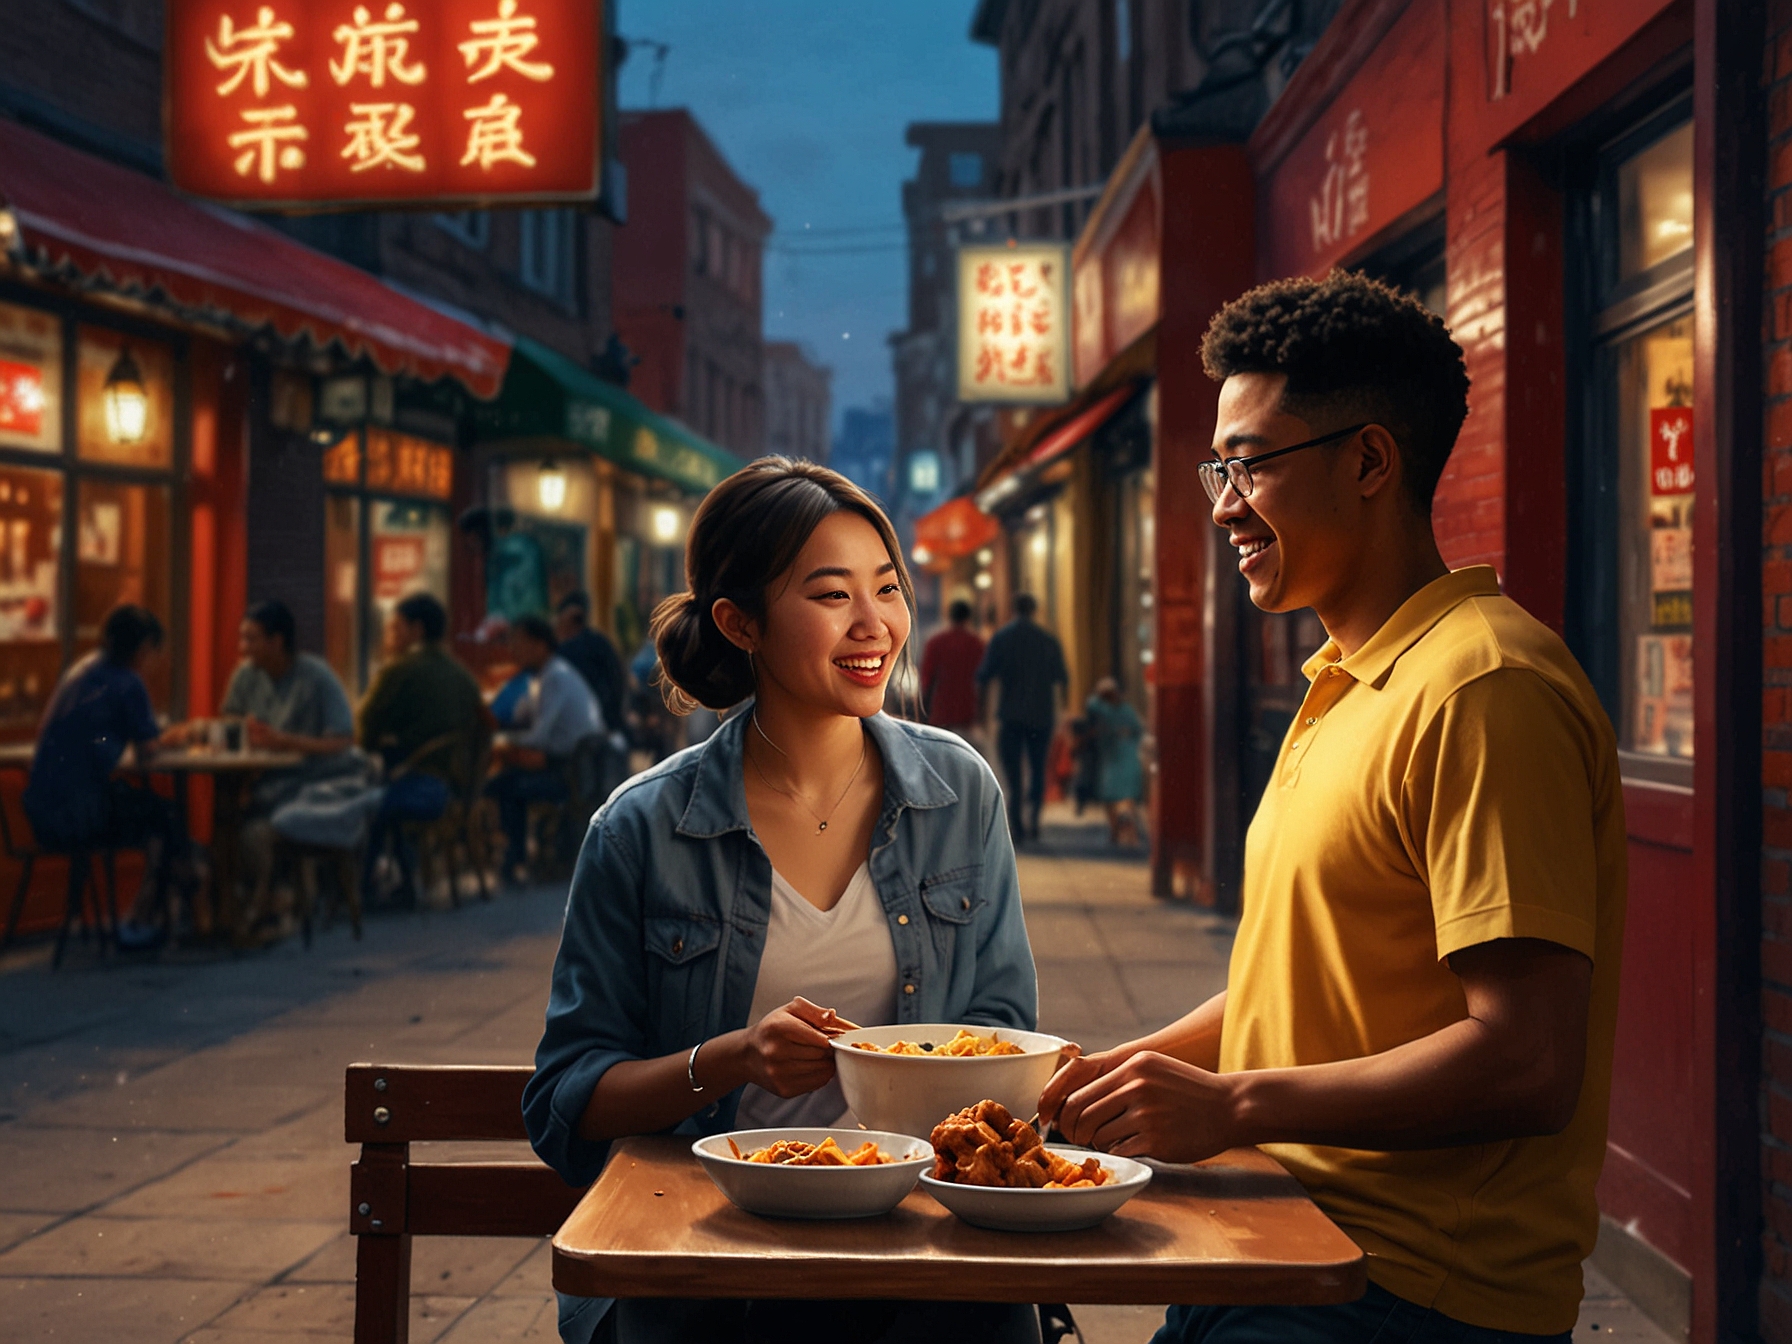 Yani Macute and her cousin savoring dishes like Sweet and Sour Chicken, Egg Fried Rice, and Dumplings at a popular Chinese takeout spot in Leeds, with vibrant street scenes in the background.